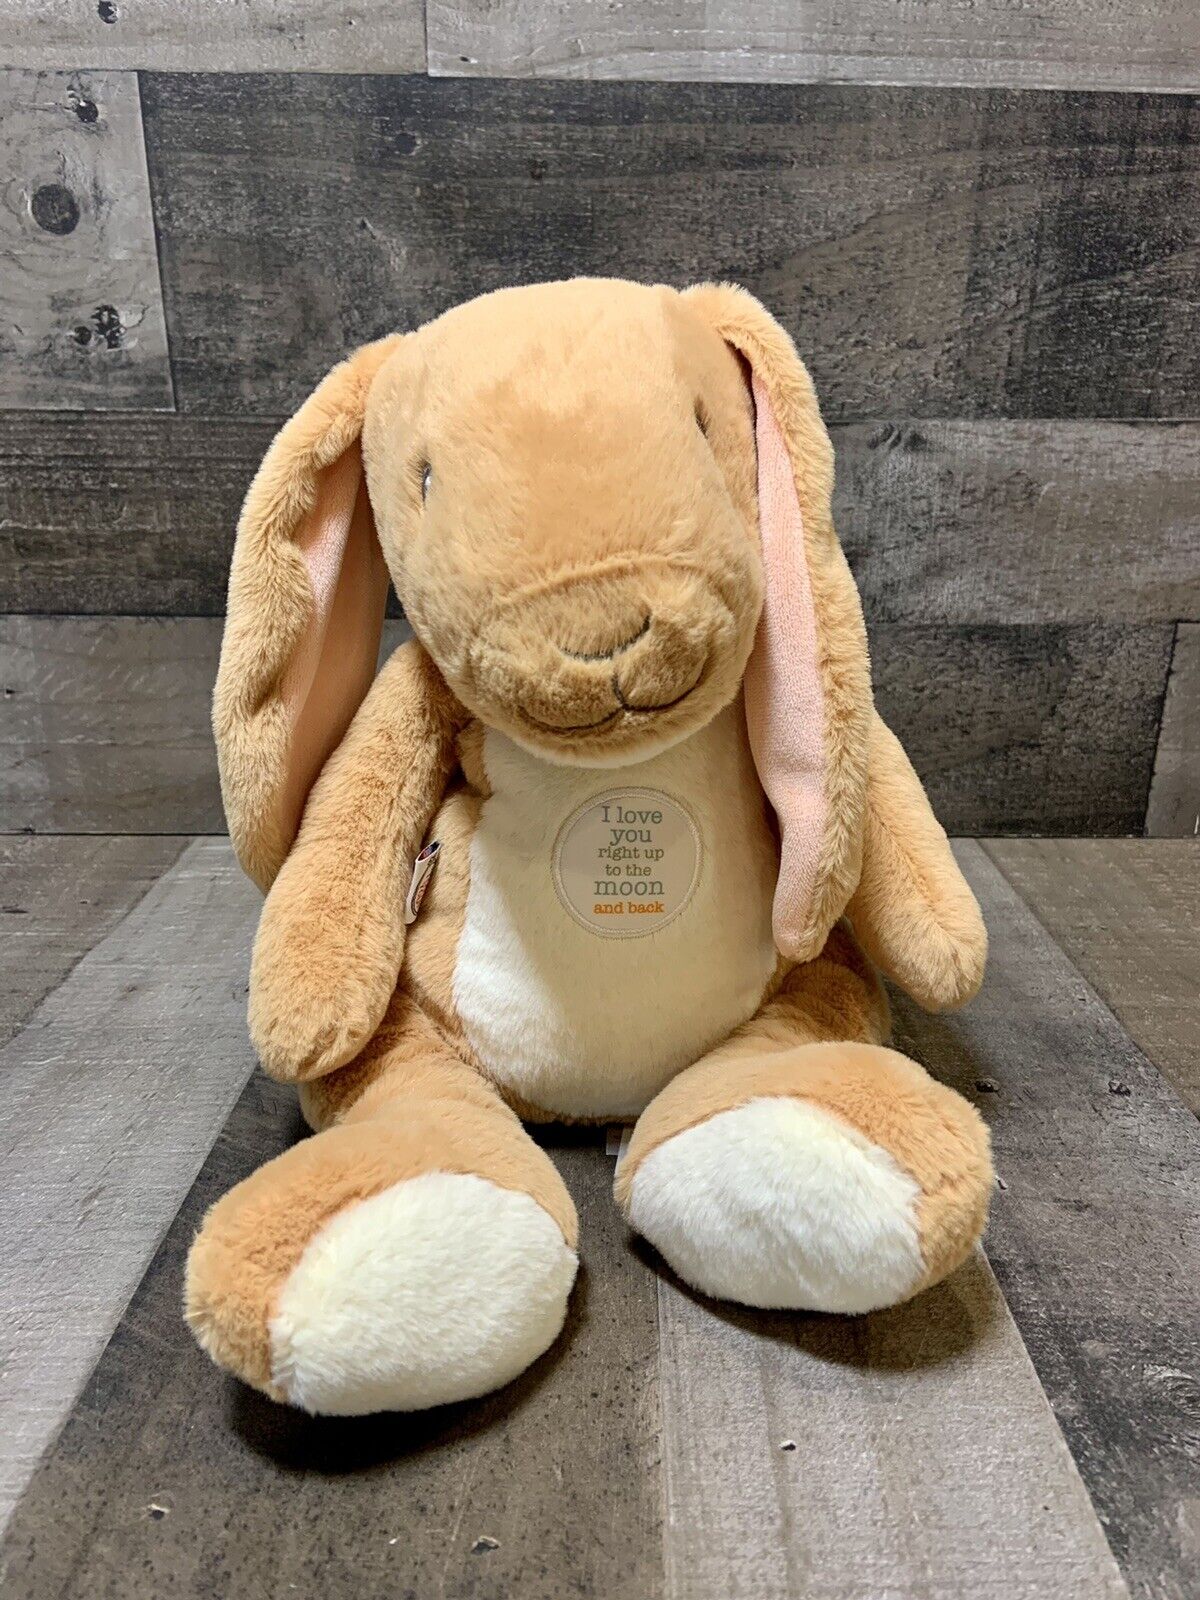 Guess How Much I Love You Nutbrown Hare Bean Bag Plush, 9 inches